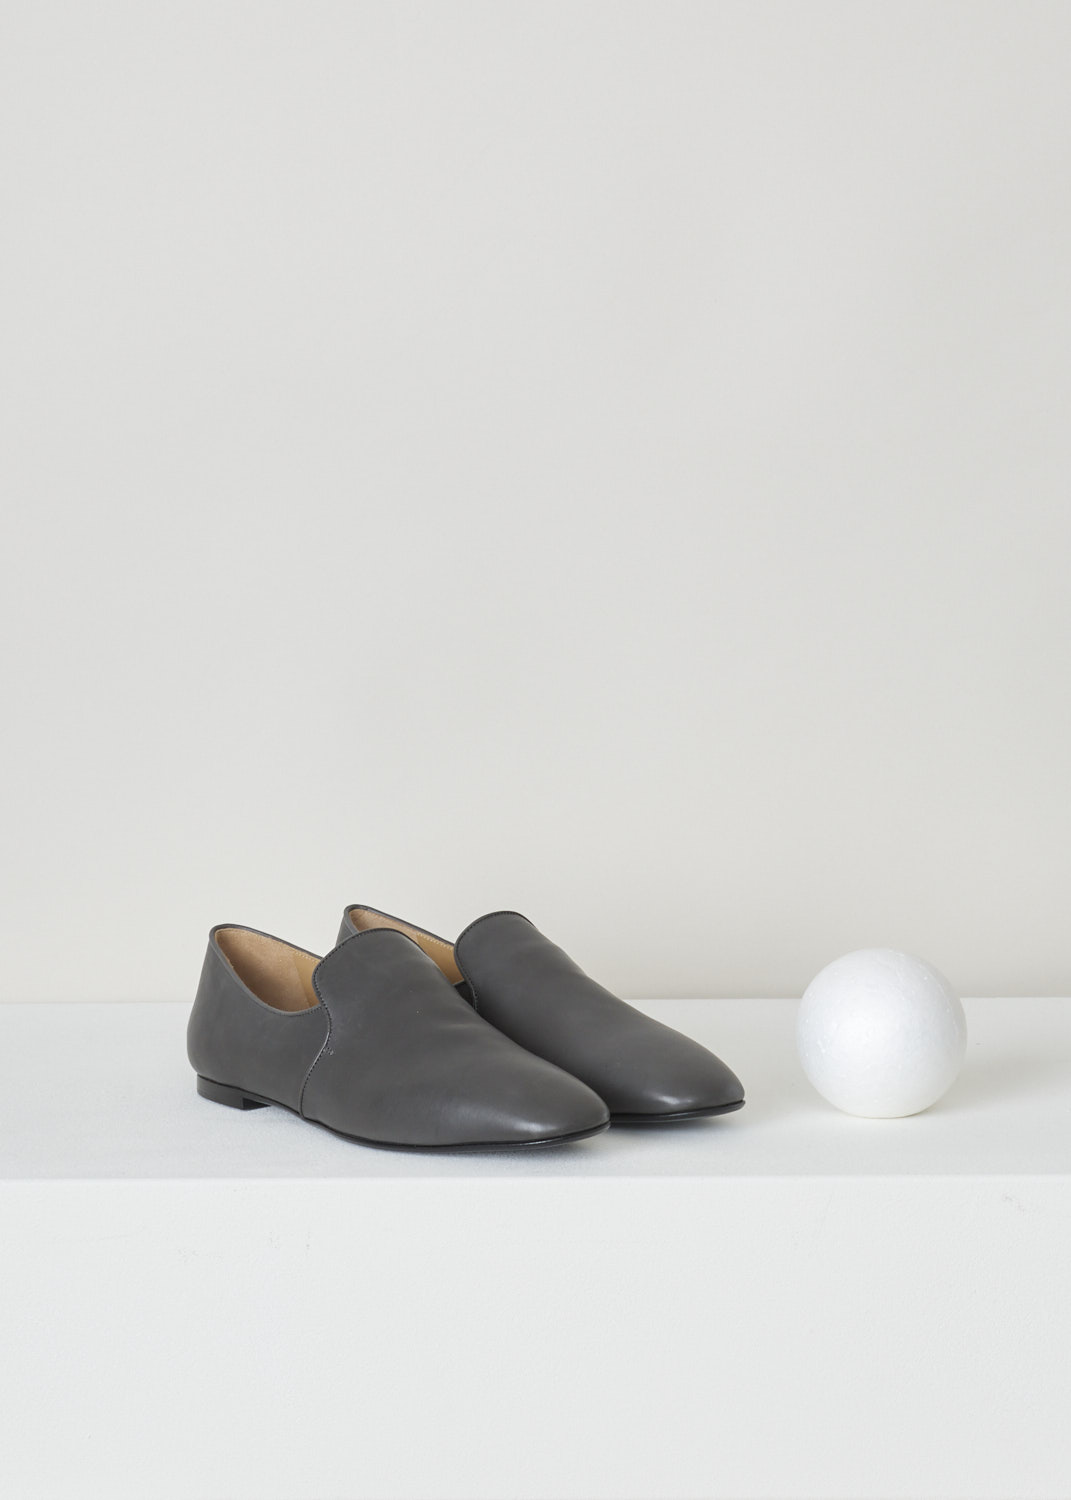 The Row, Charcoal coloured leather alys slipper, F1005_L64_COL, grey, front, Made from a minimalist perspective, and crafted out of butter-soft calfskin. Featuring a rounded toe vamp and comes with grey satin piping on the topline. The seamless lining ensures they can be worn with or without socks.